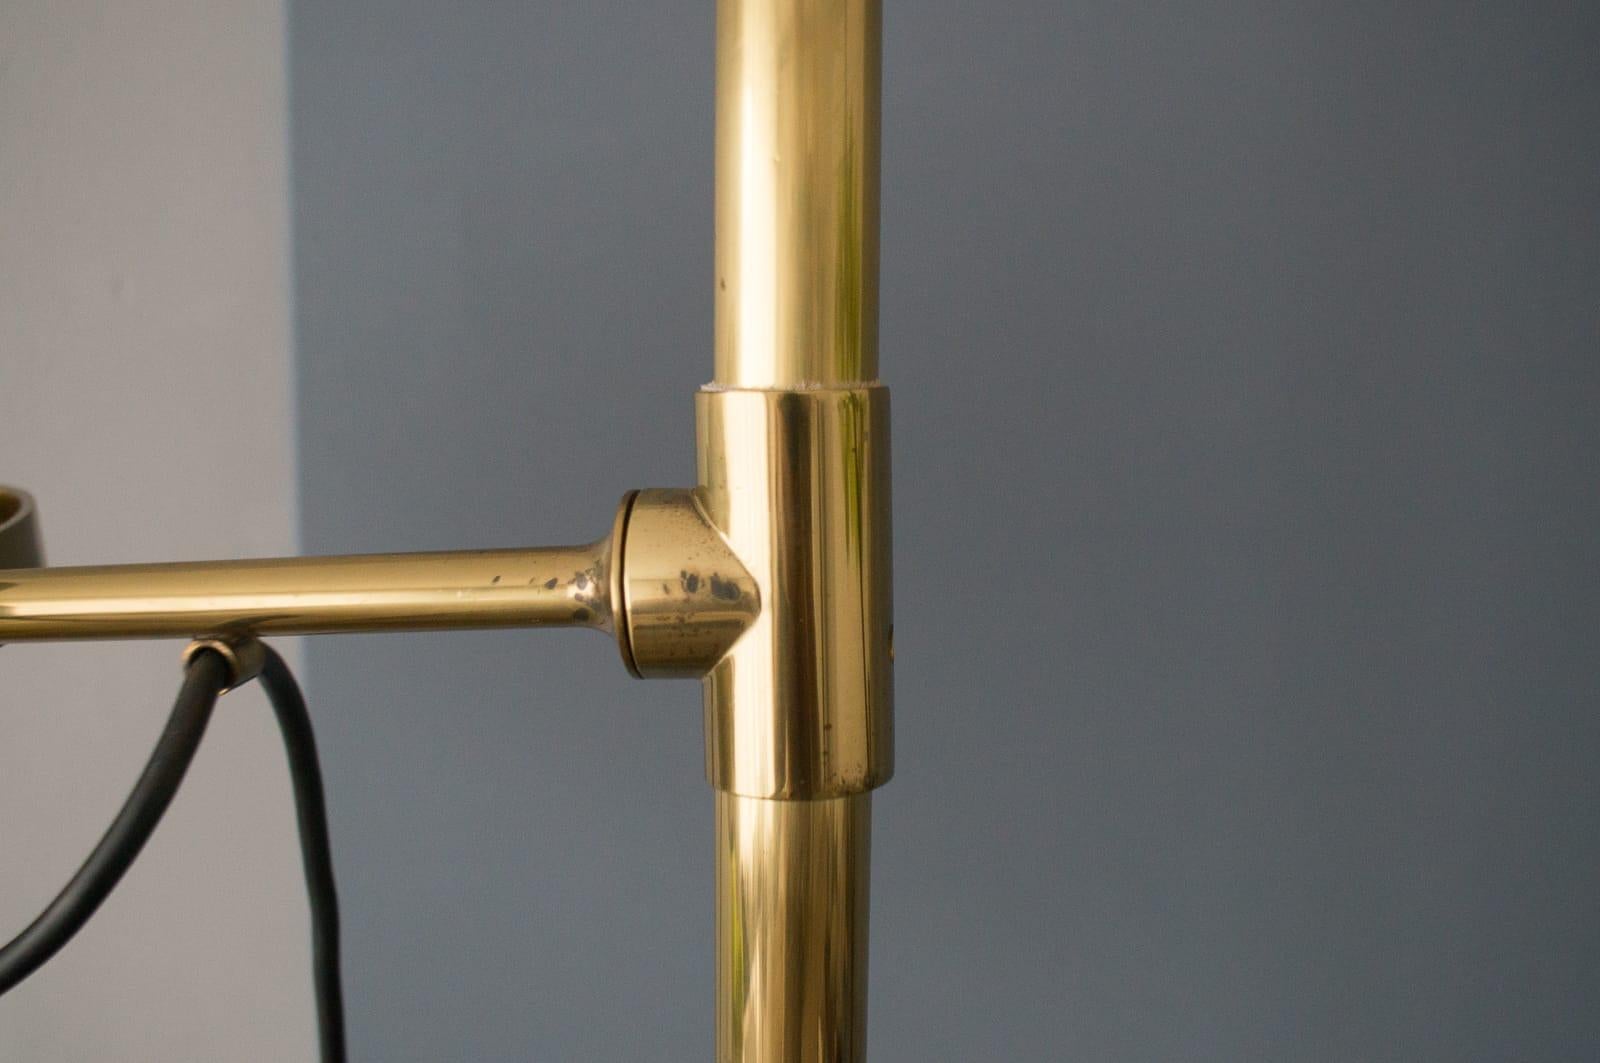 Extremly Rare Brass Tension Lamp from Florian Schulz, Model S 100 11